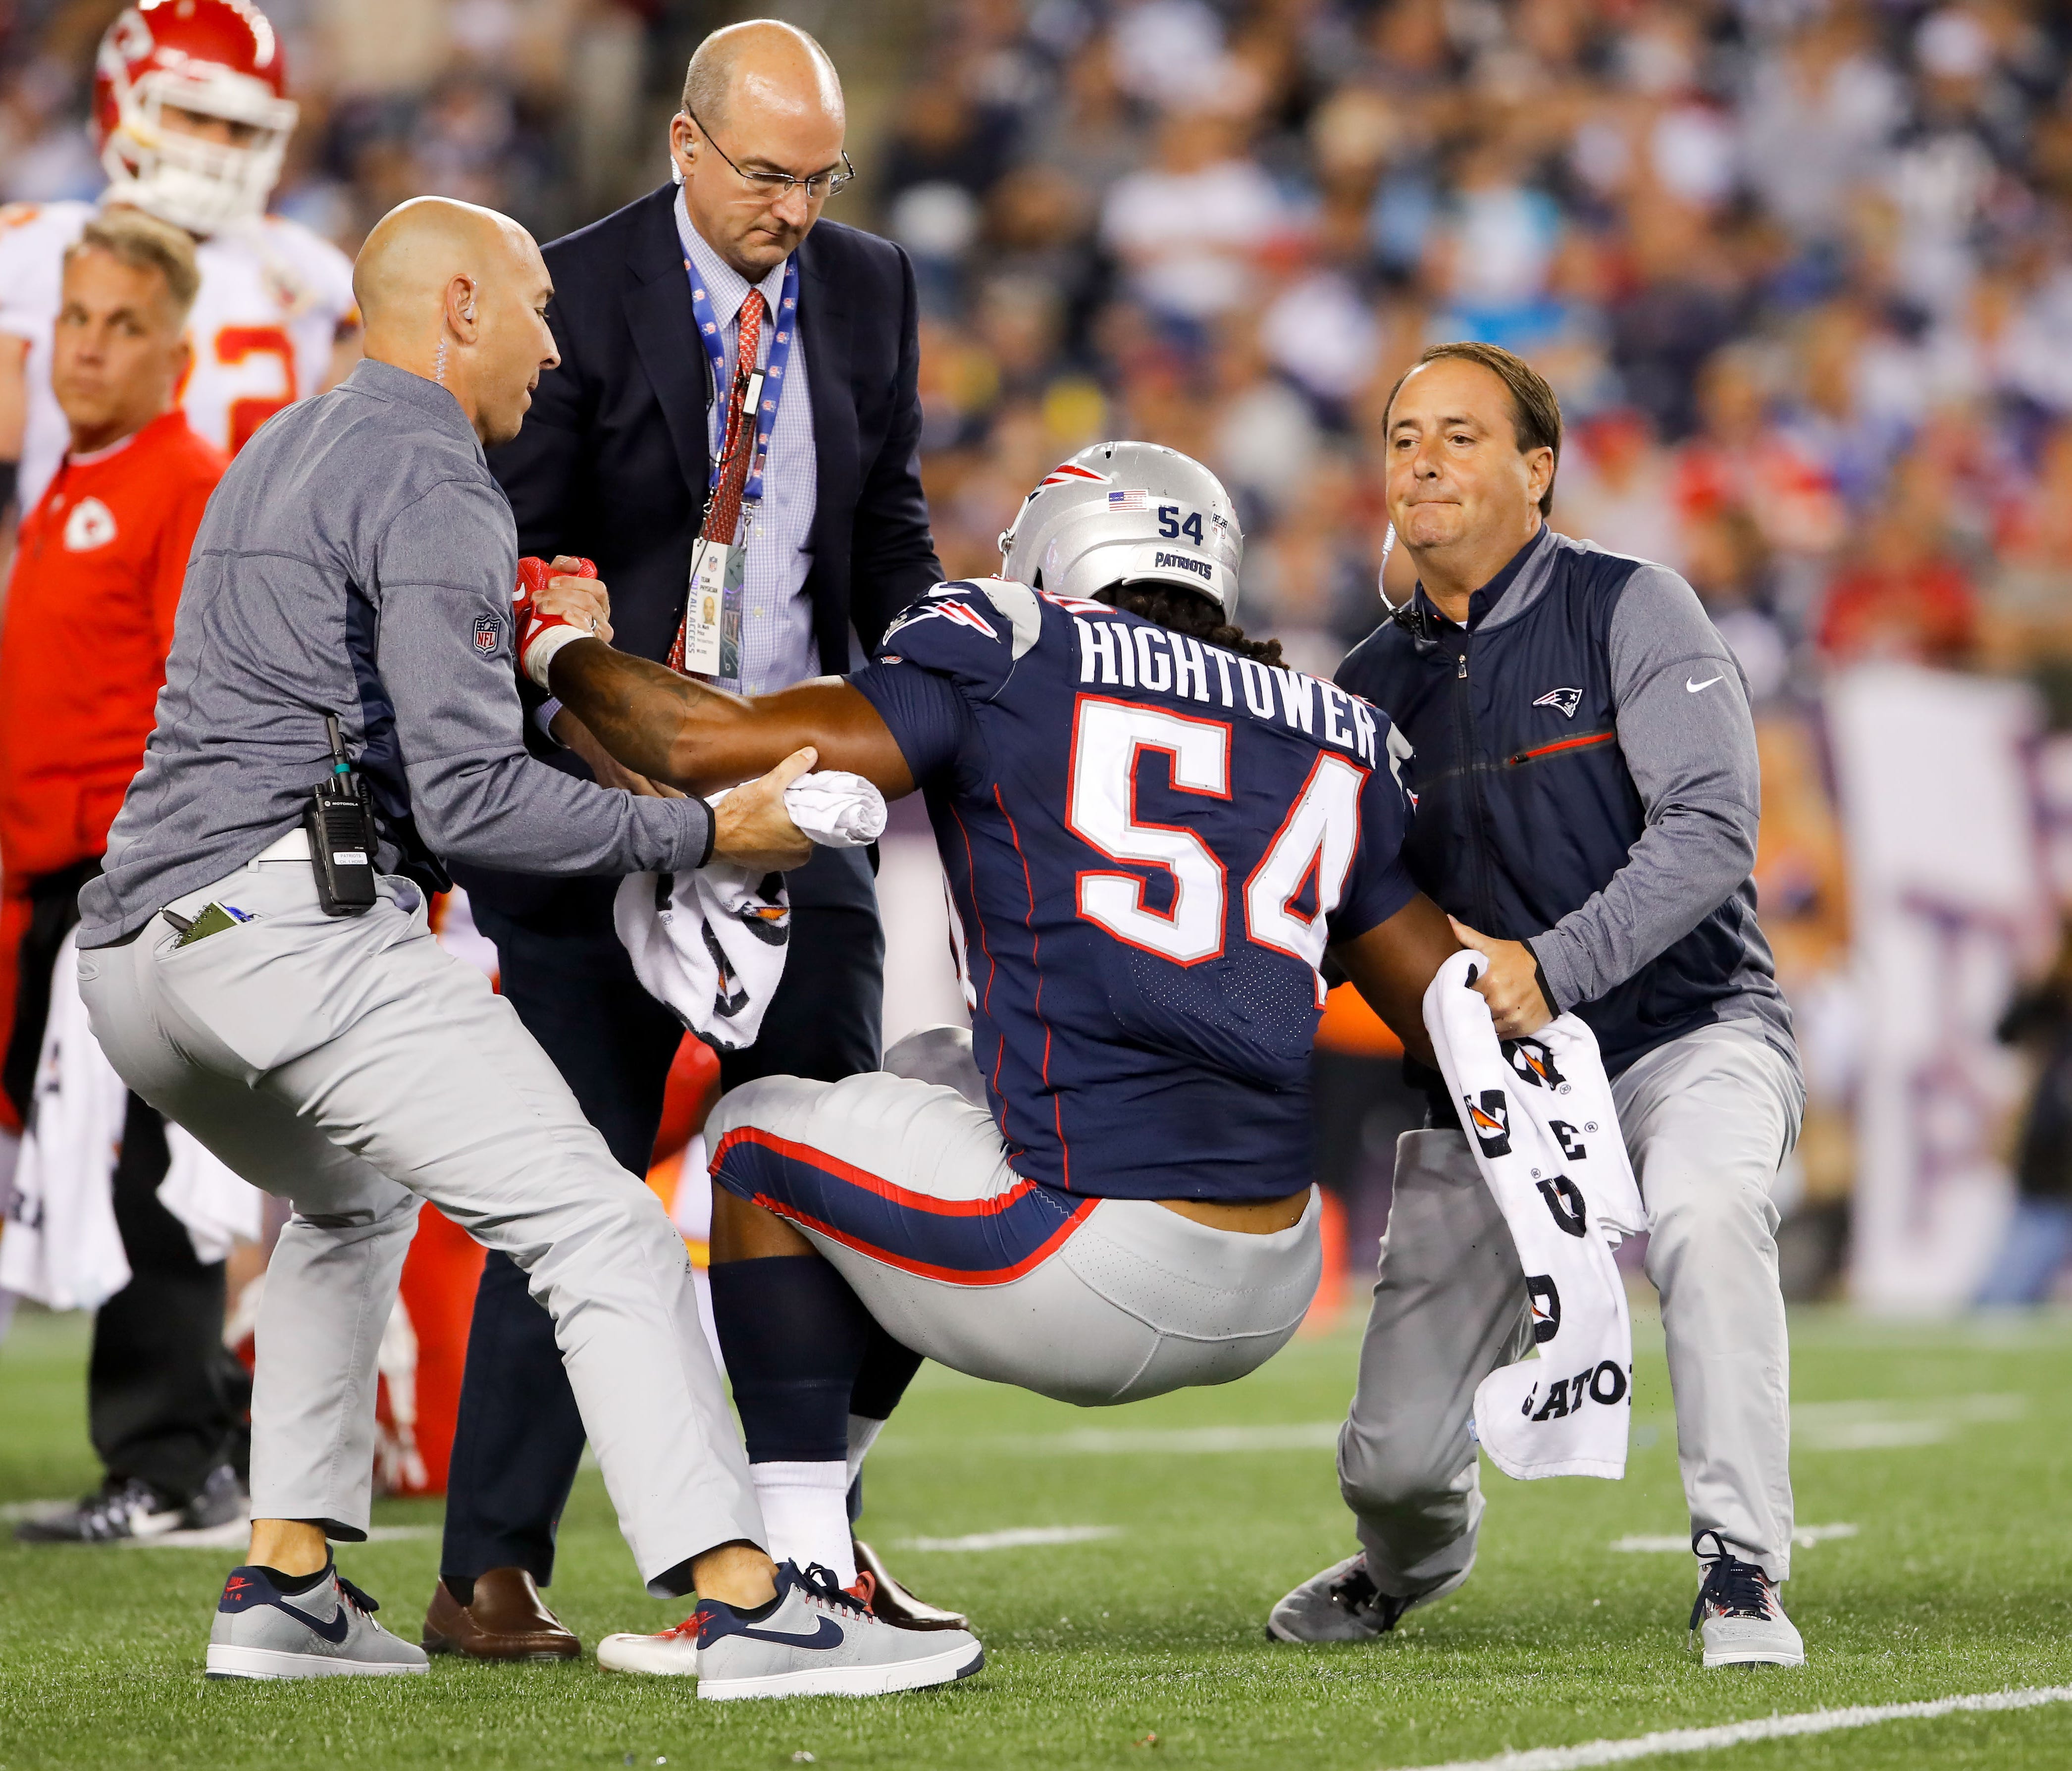 Trainers help New England Patriots middle linebacker Dont'a Hightower (54) off of the field after an injury during the third quarter at Gillette Stadium.